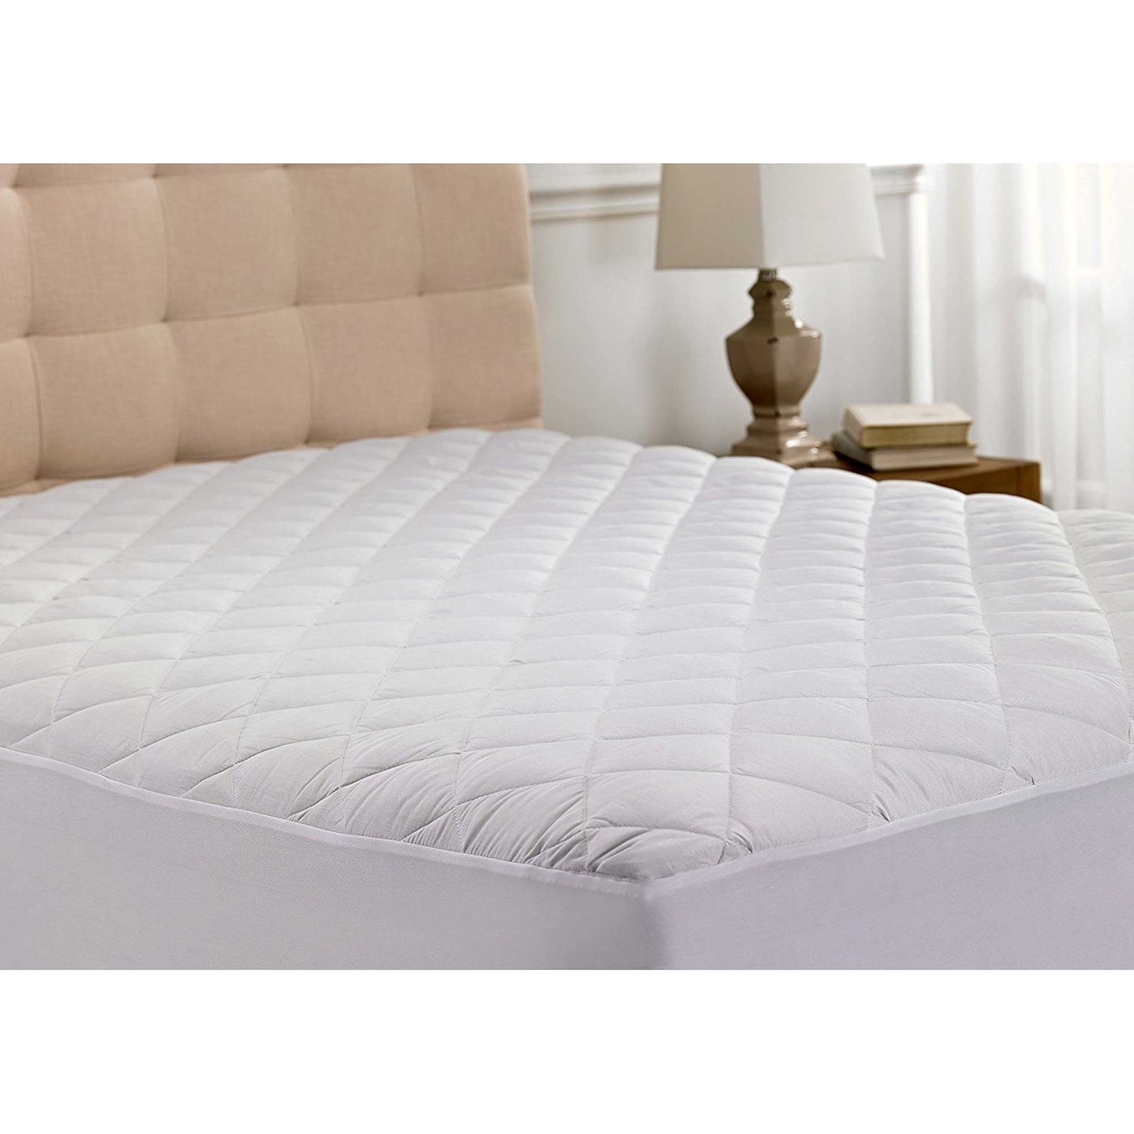 Beauty Sleep Quilted Hypoallergenic Mattress Pad - Image 3 of 4